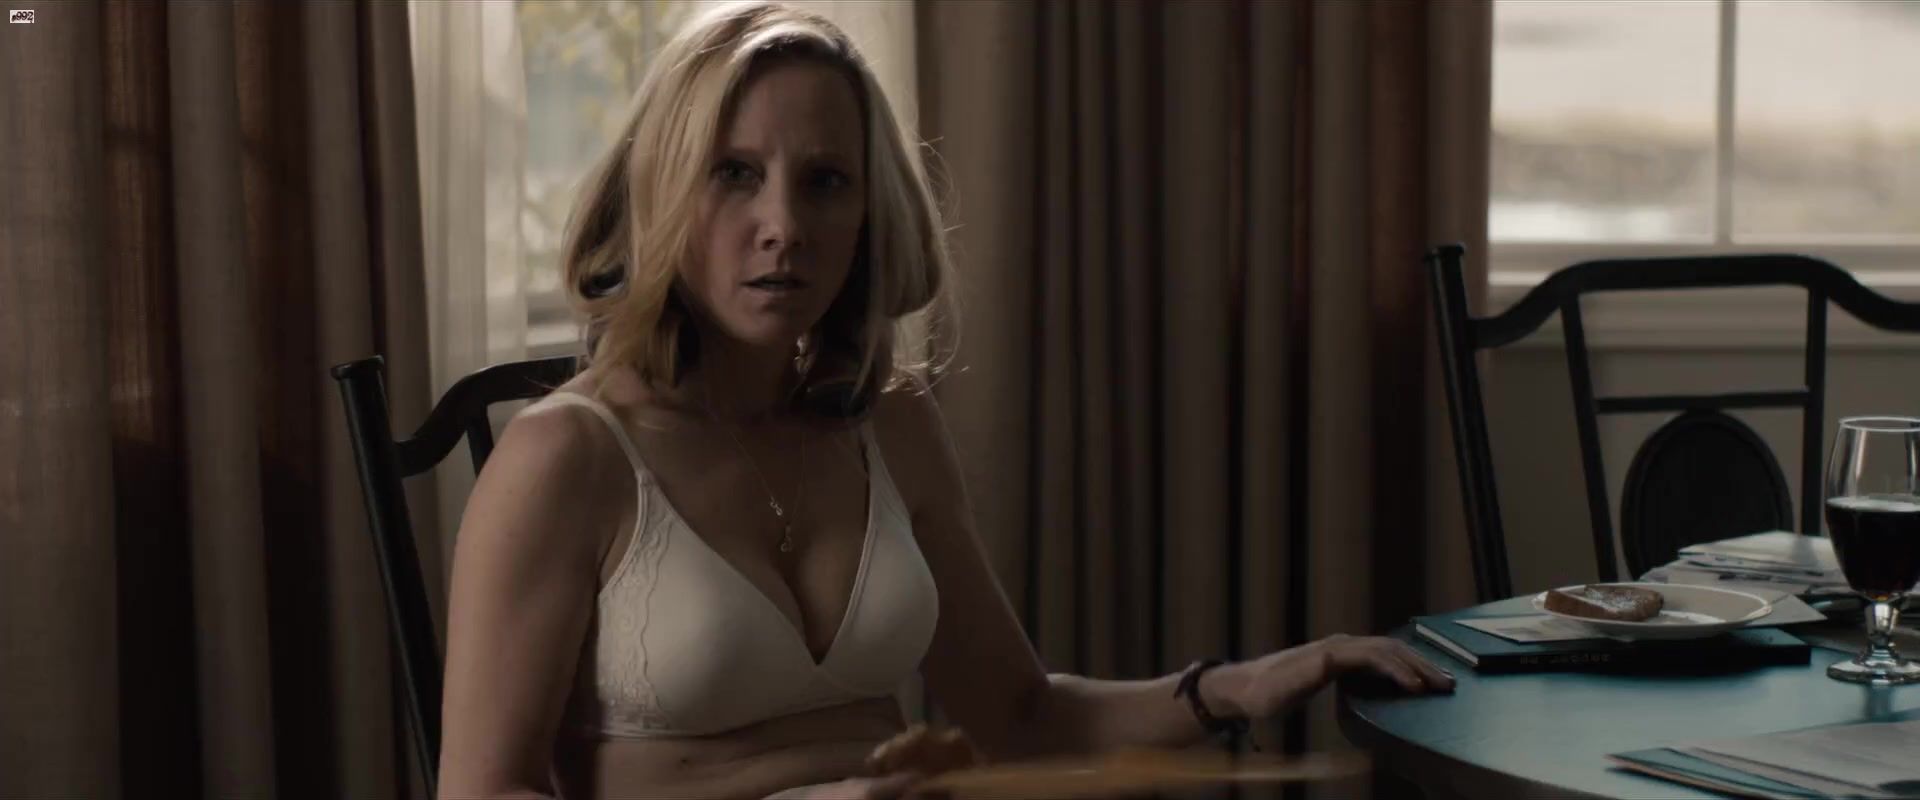 Work Celebs Nude Video: Emily Blunt, Anne Heche - Arthur Newman (2012) Banging